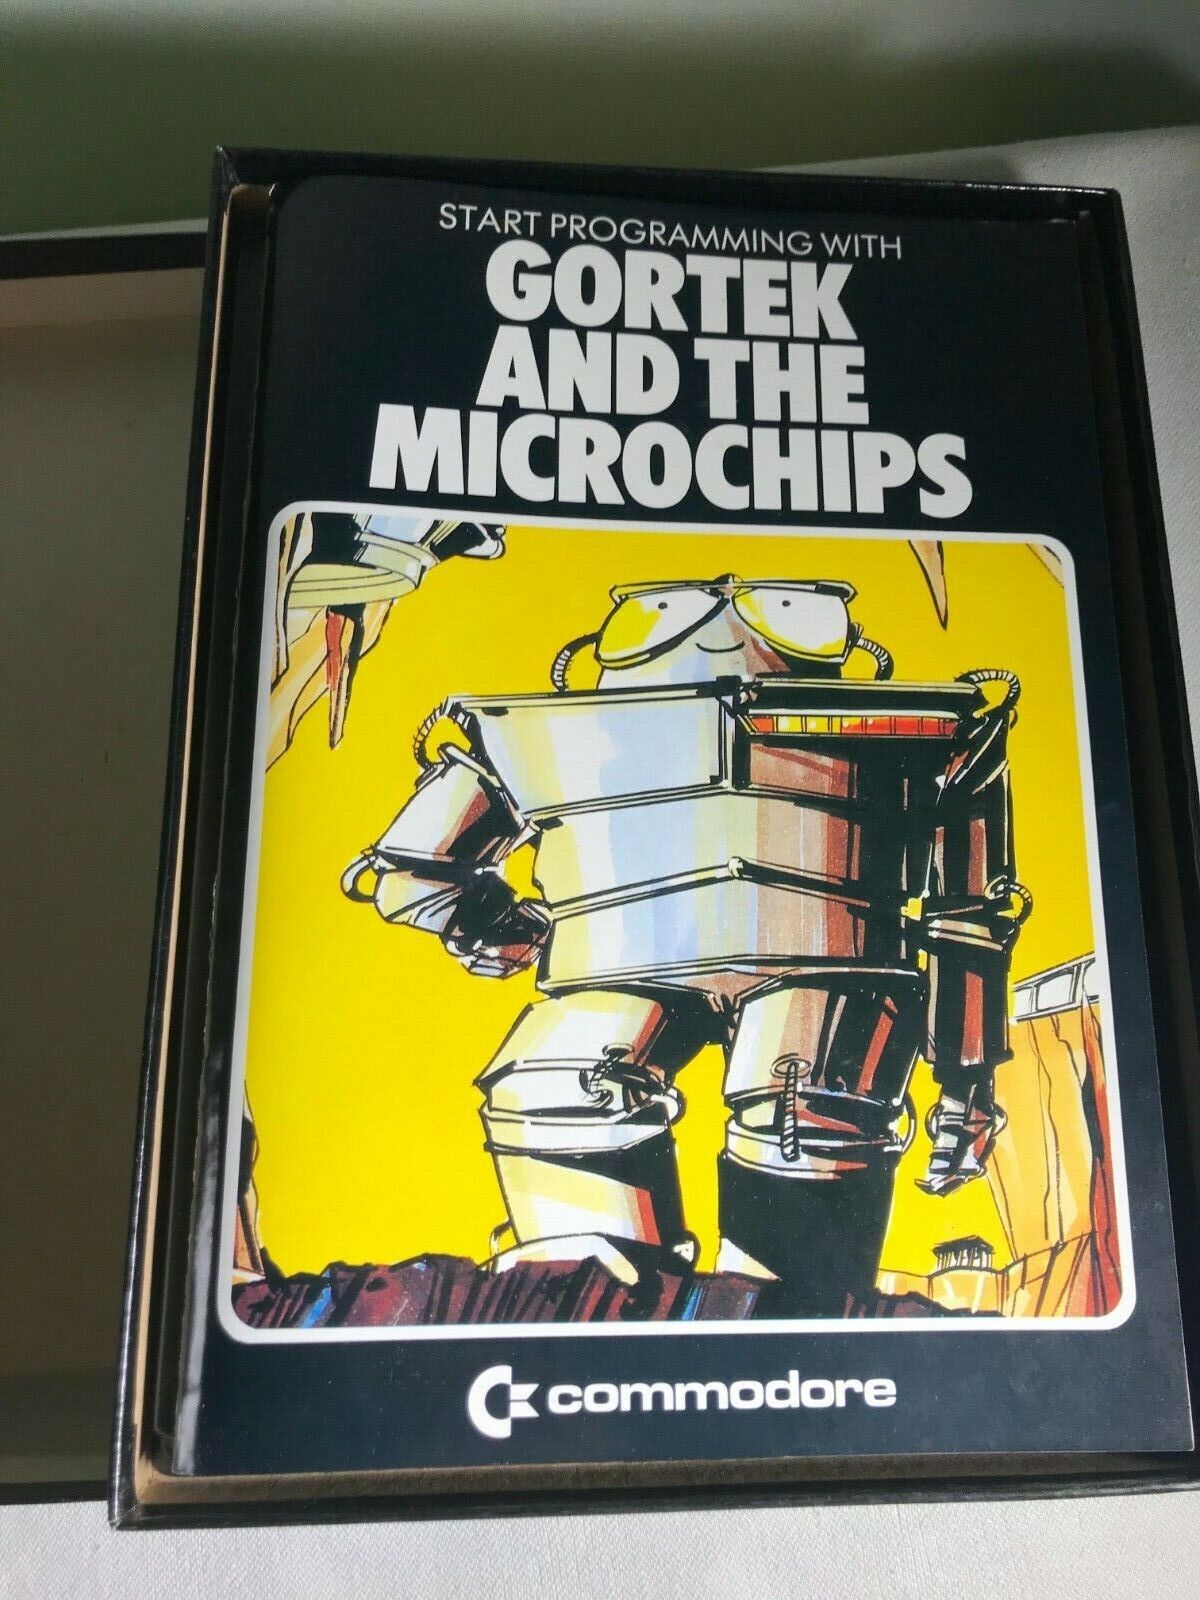 Authentic Vintage COMMODORE - Gortek and the Microchips -1983 - Programming game